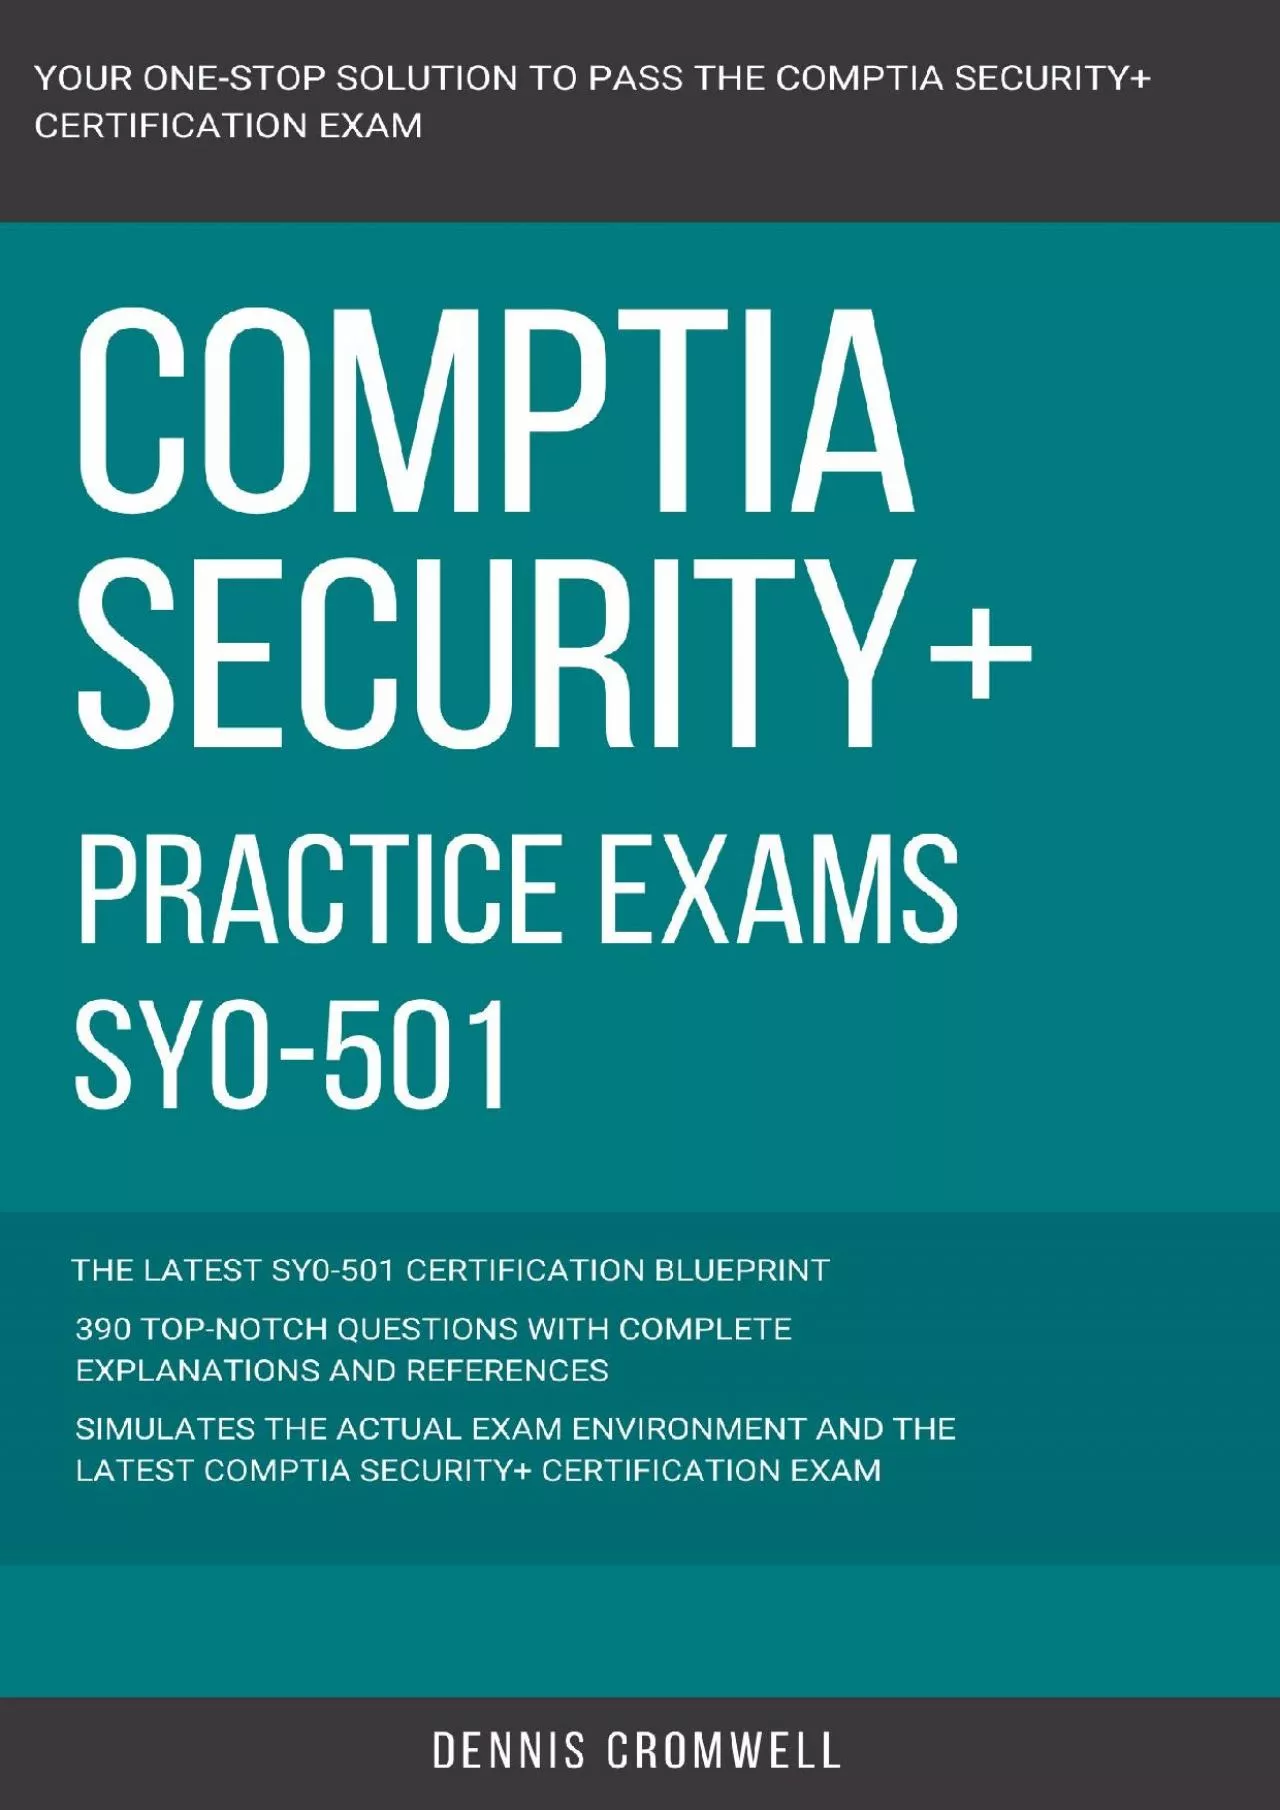 [READ]-CompTIA: CompTIA Security+: SY0-501: Practice Exams SY0-501: 390 Top Notch Questions